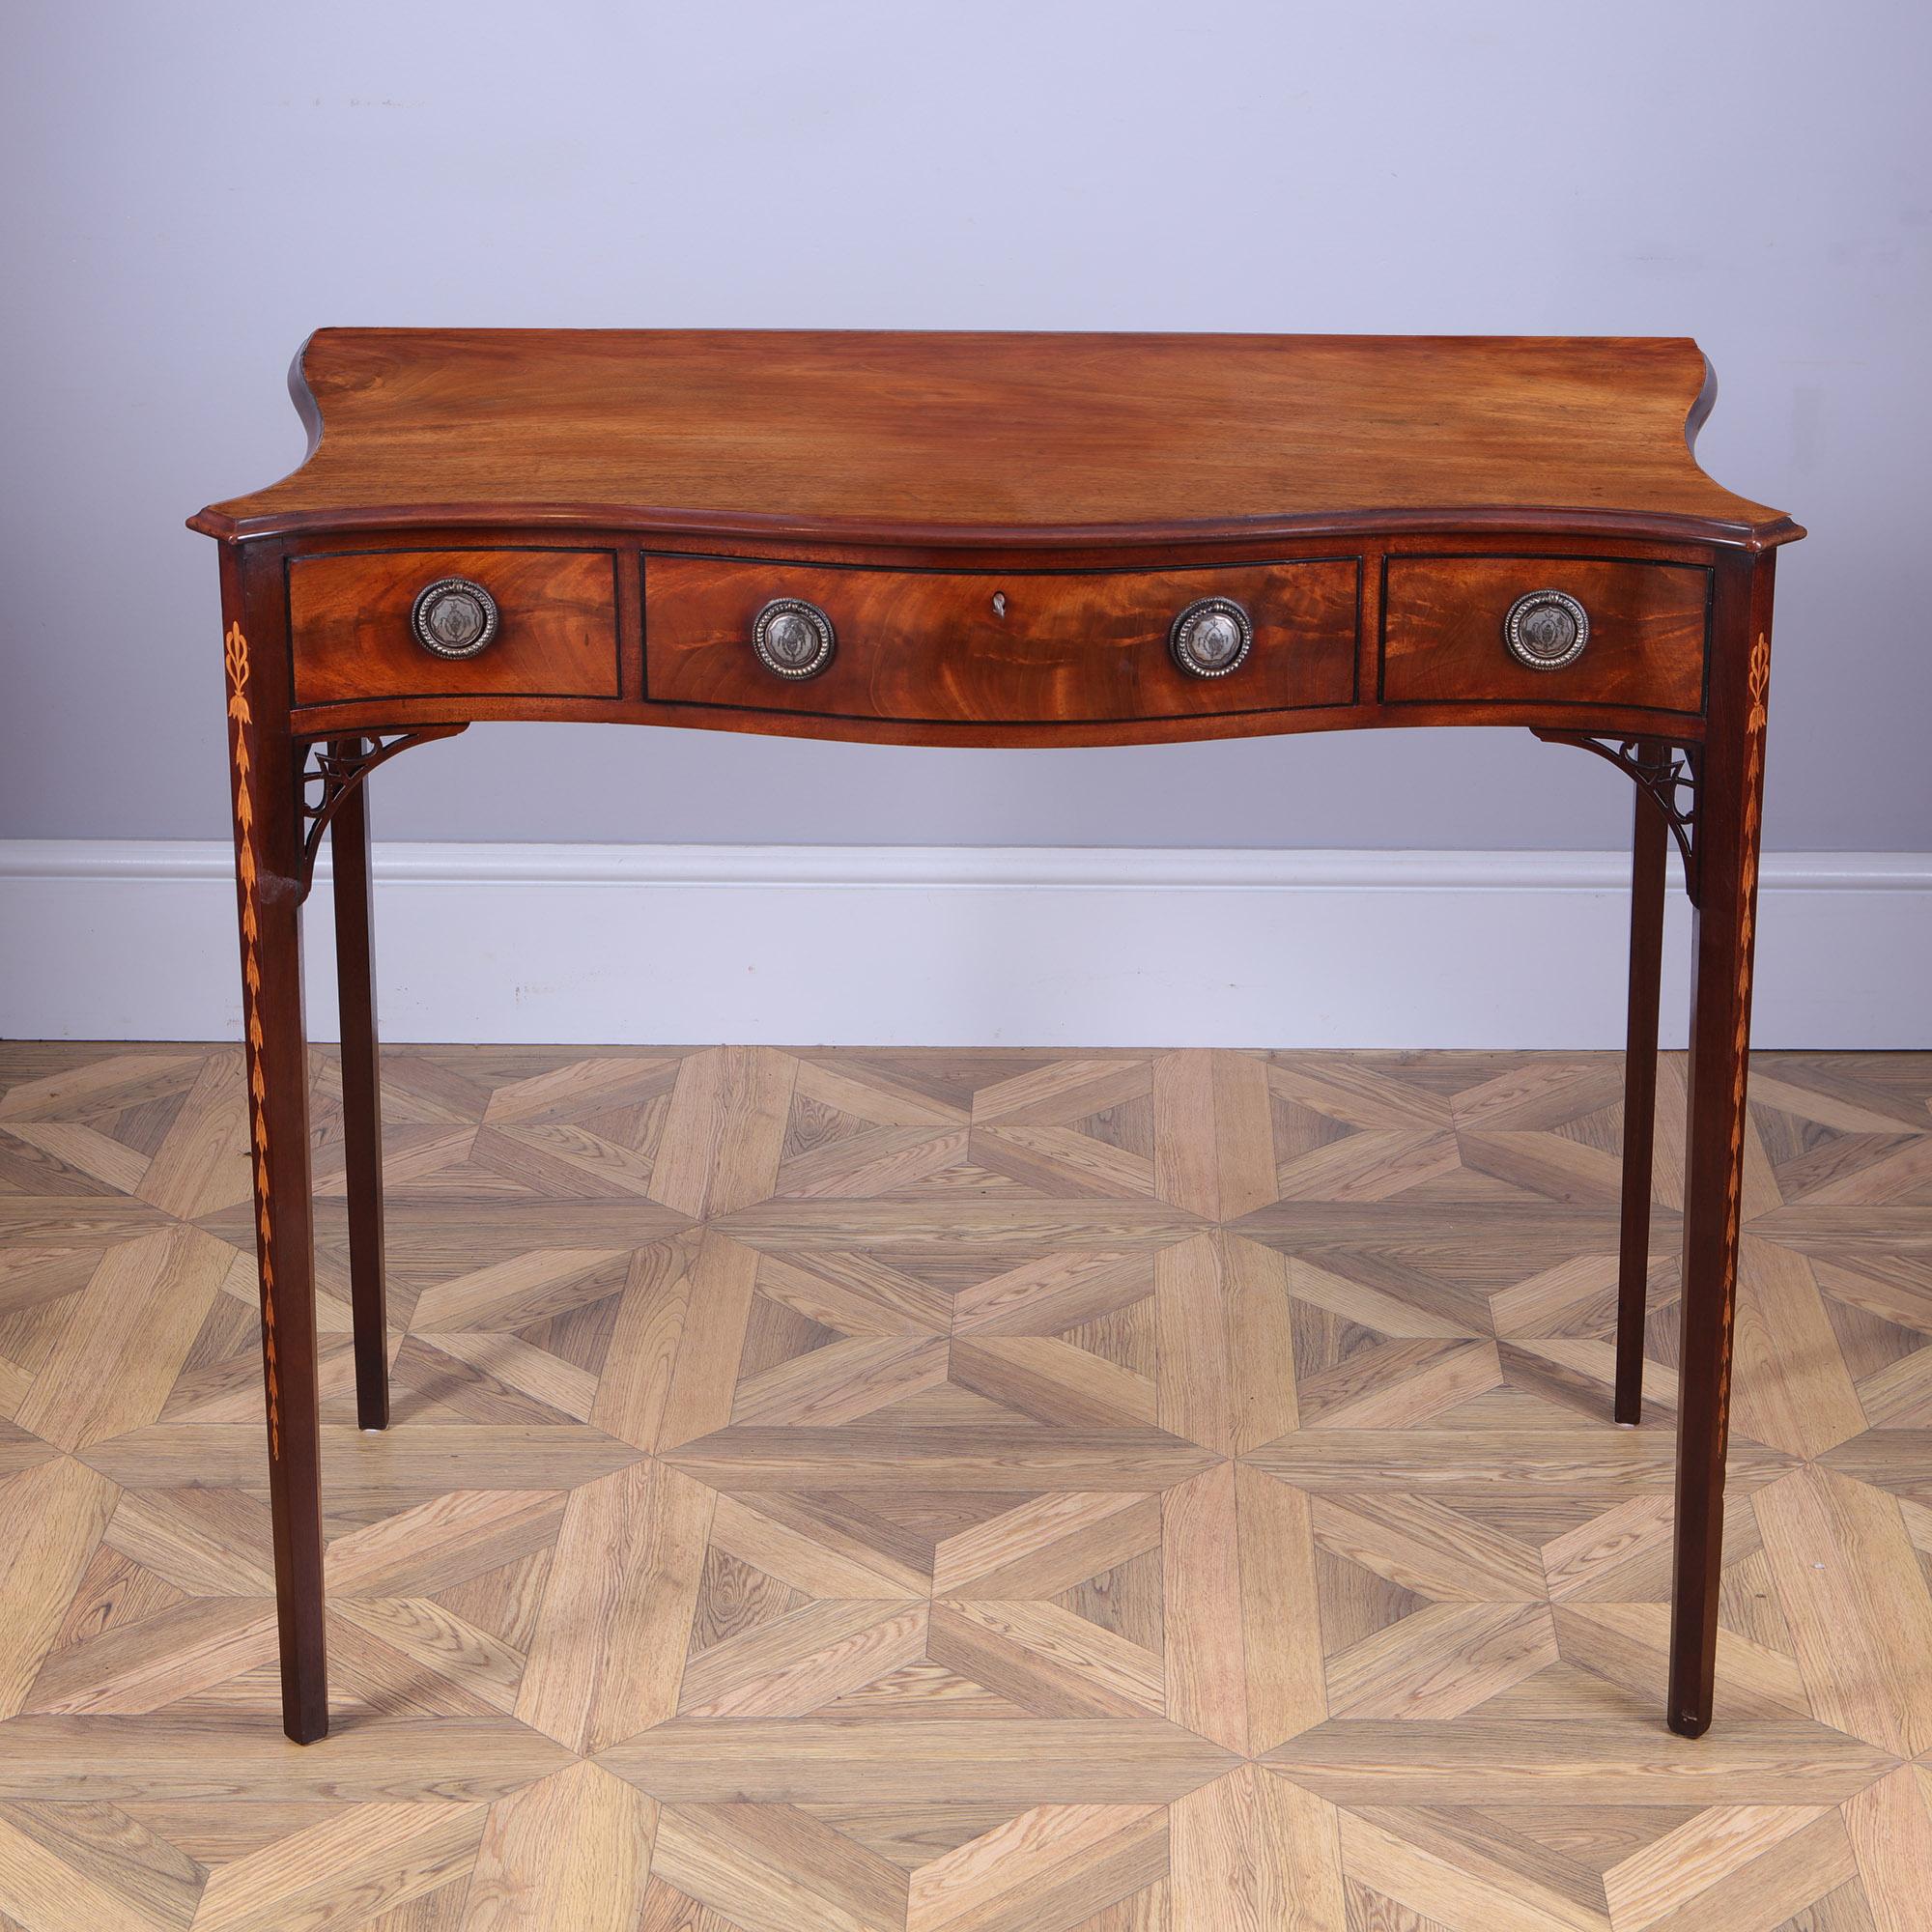 George III Hepplewhite Side Table, the well-figured solid mahogany top with the serpentine front and curved sides, above a frieze of three drawers, each with silver plated and engraved ring handles and a lock and key to the center. The whole raised